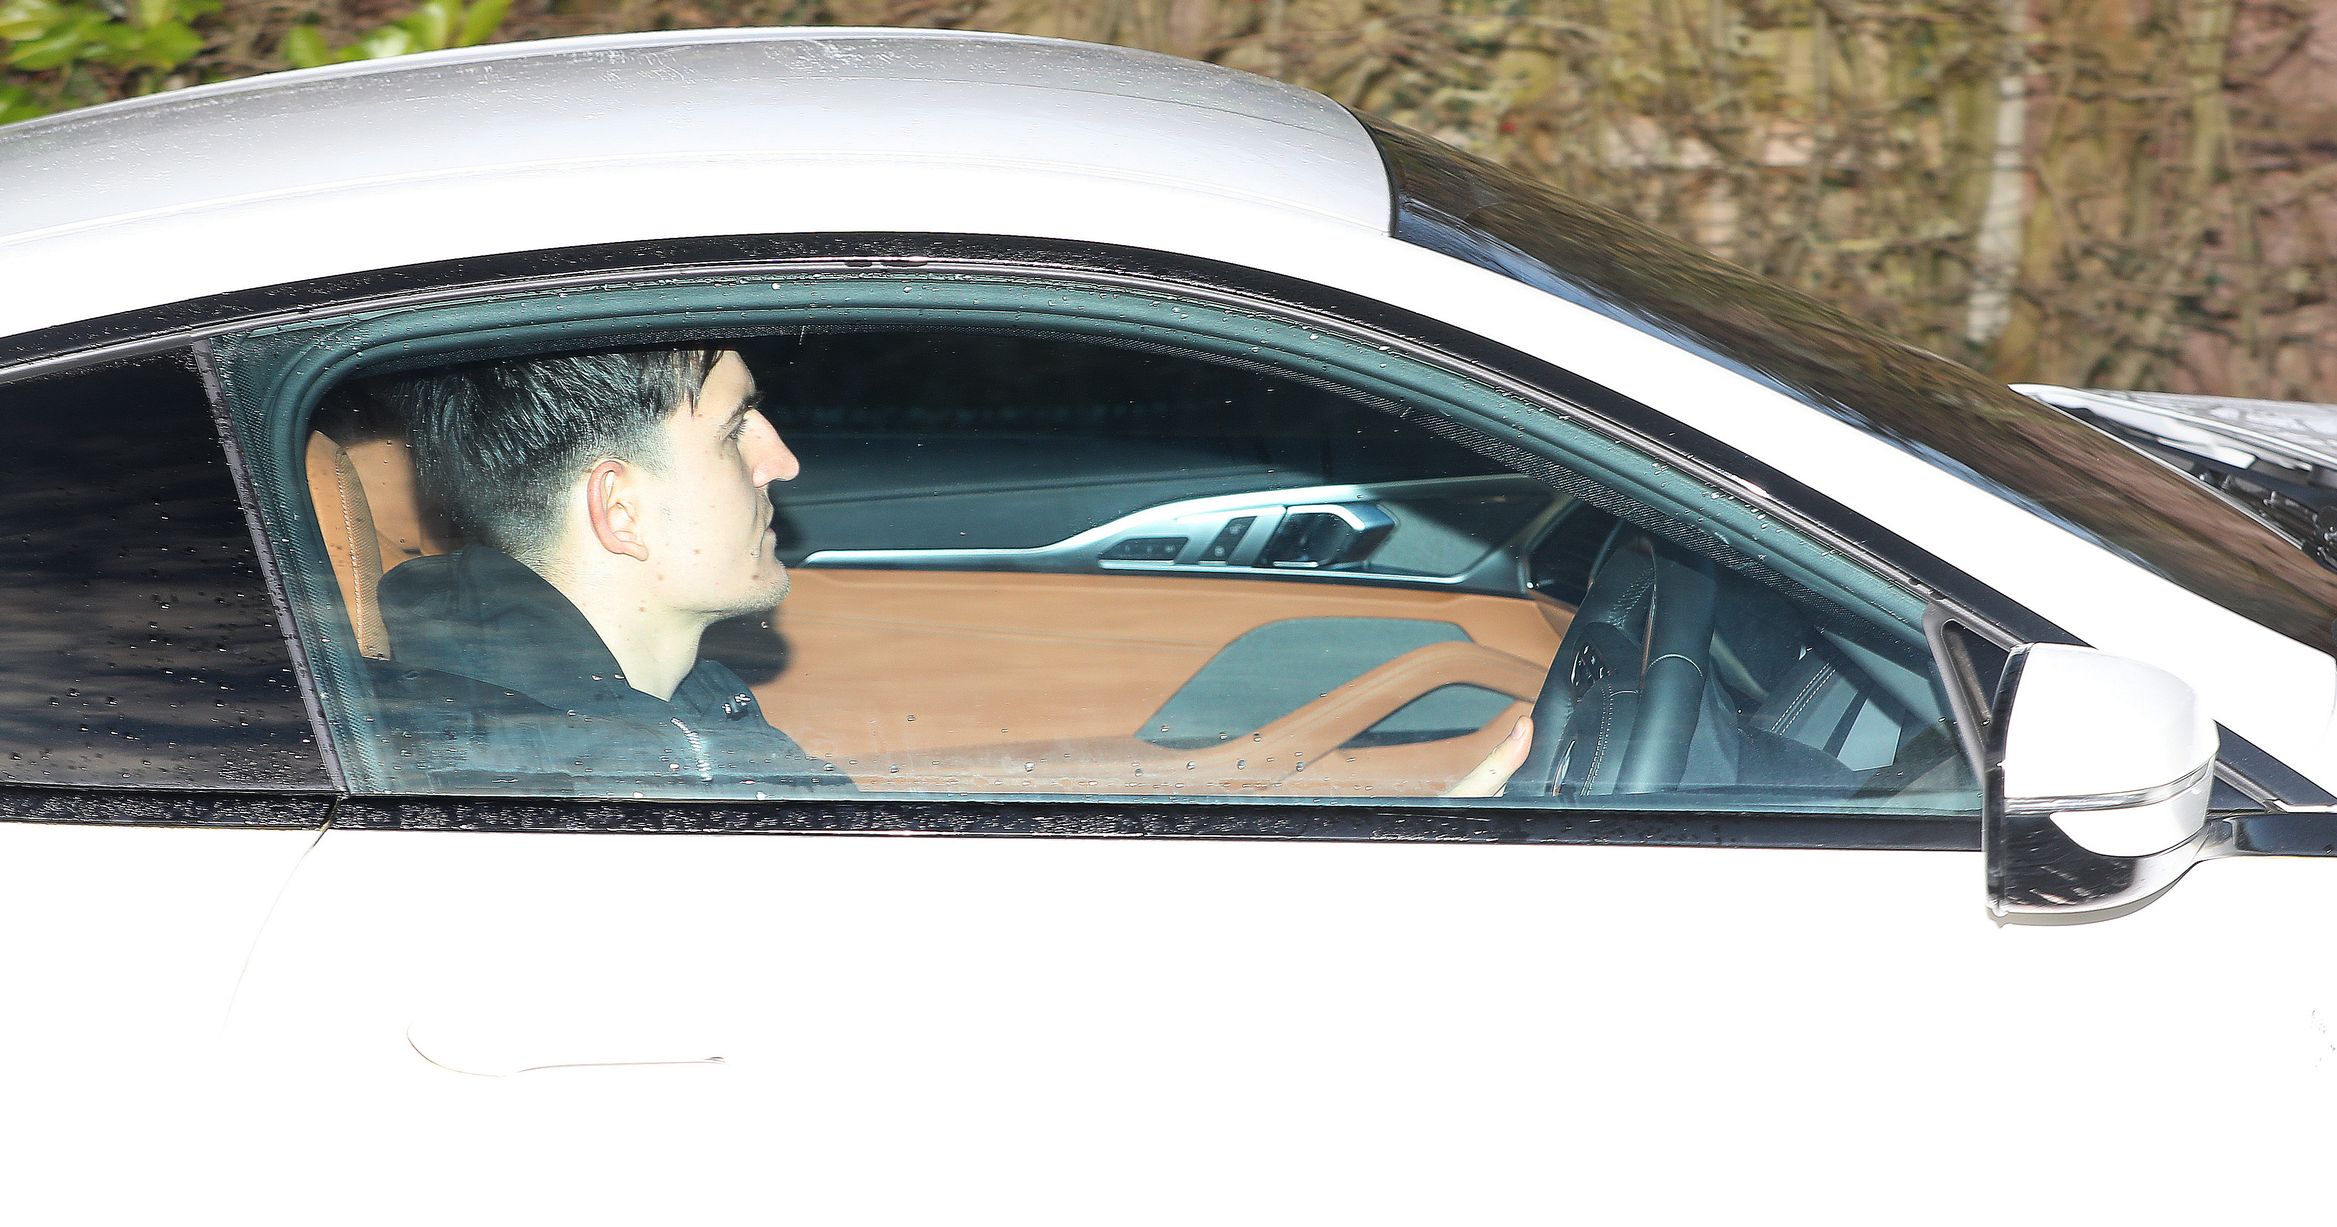 Pictures: Manchester United players arrive at Carrington after Tranmere win - Bóng Đá